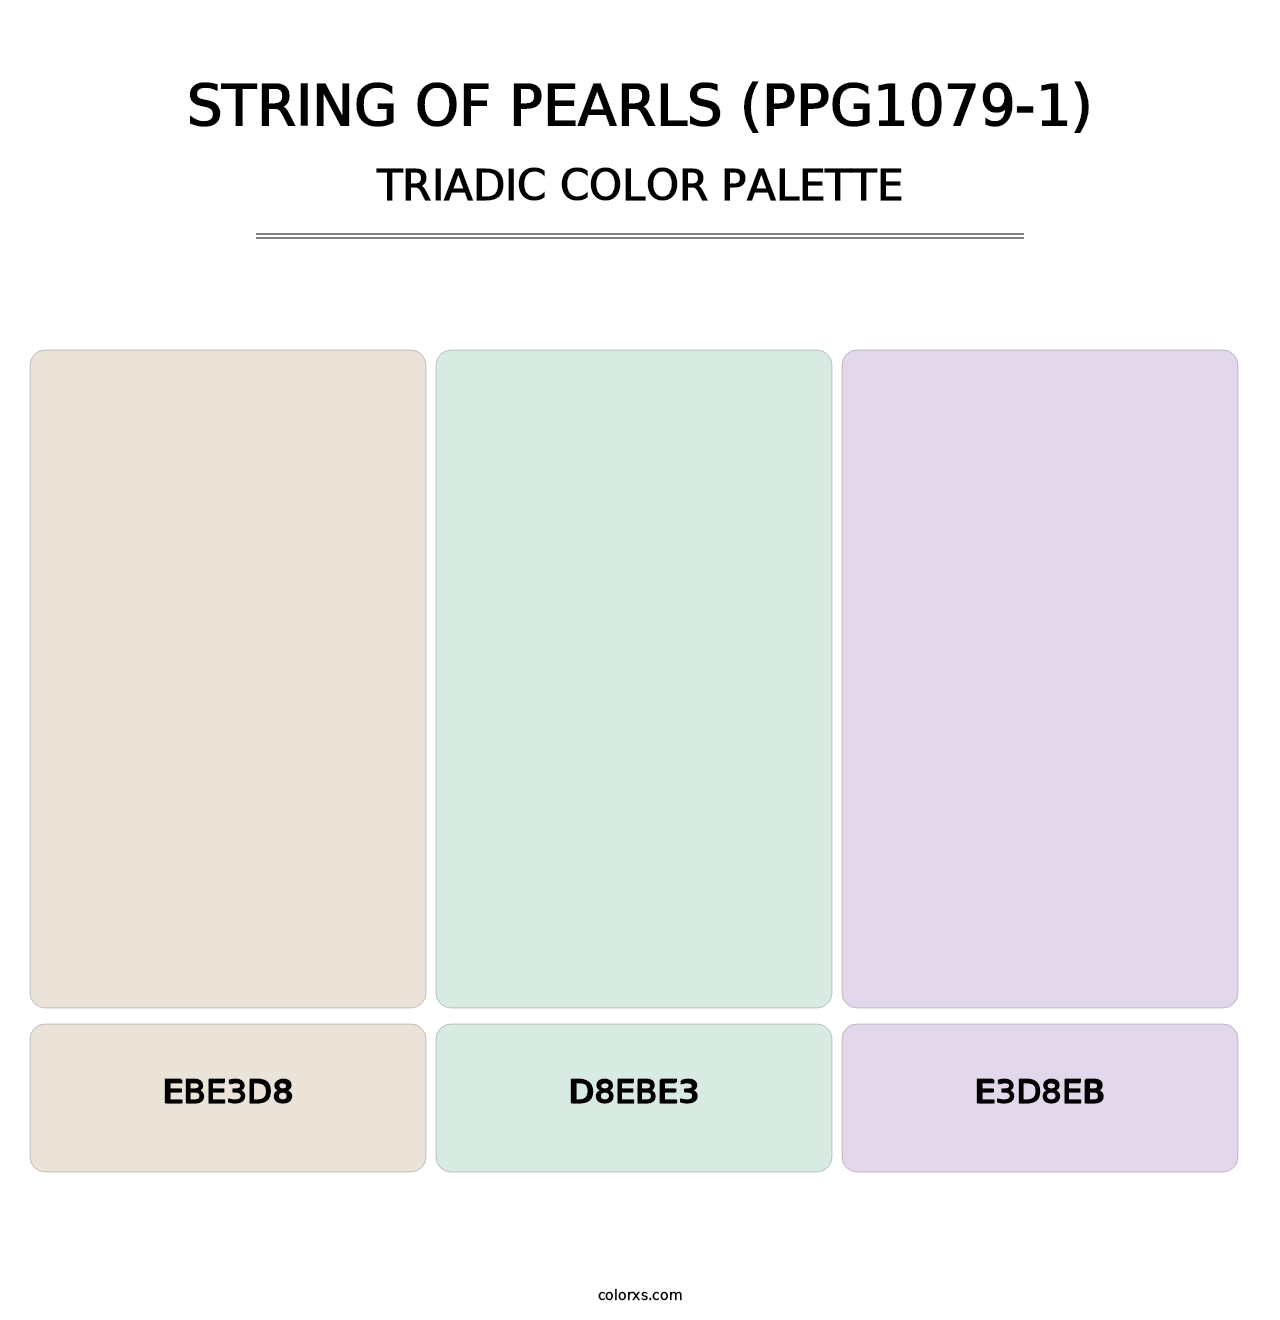 String Of Pearls (PPG1079-1) - Triadic Color Palette